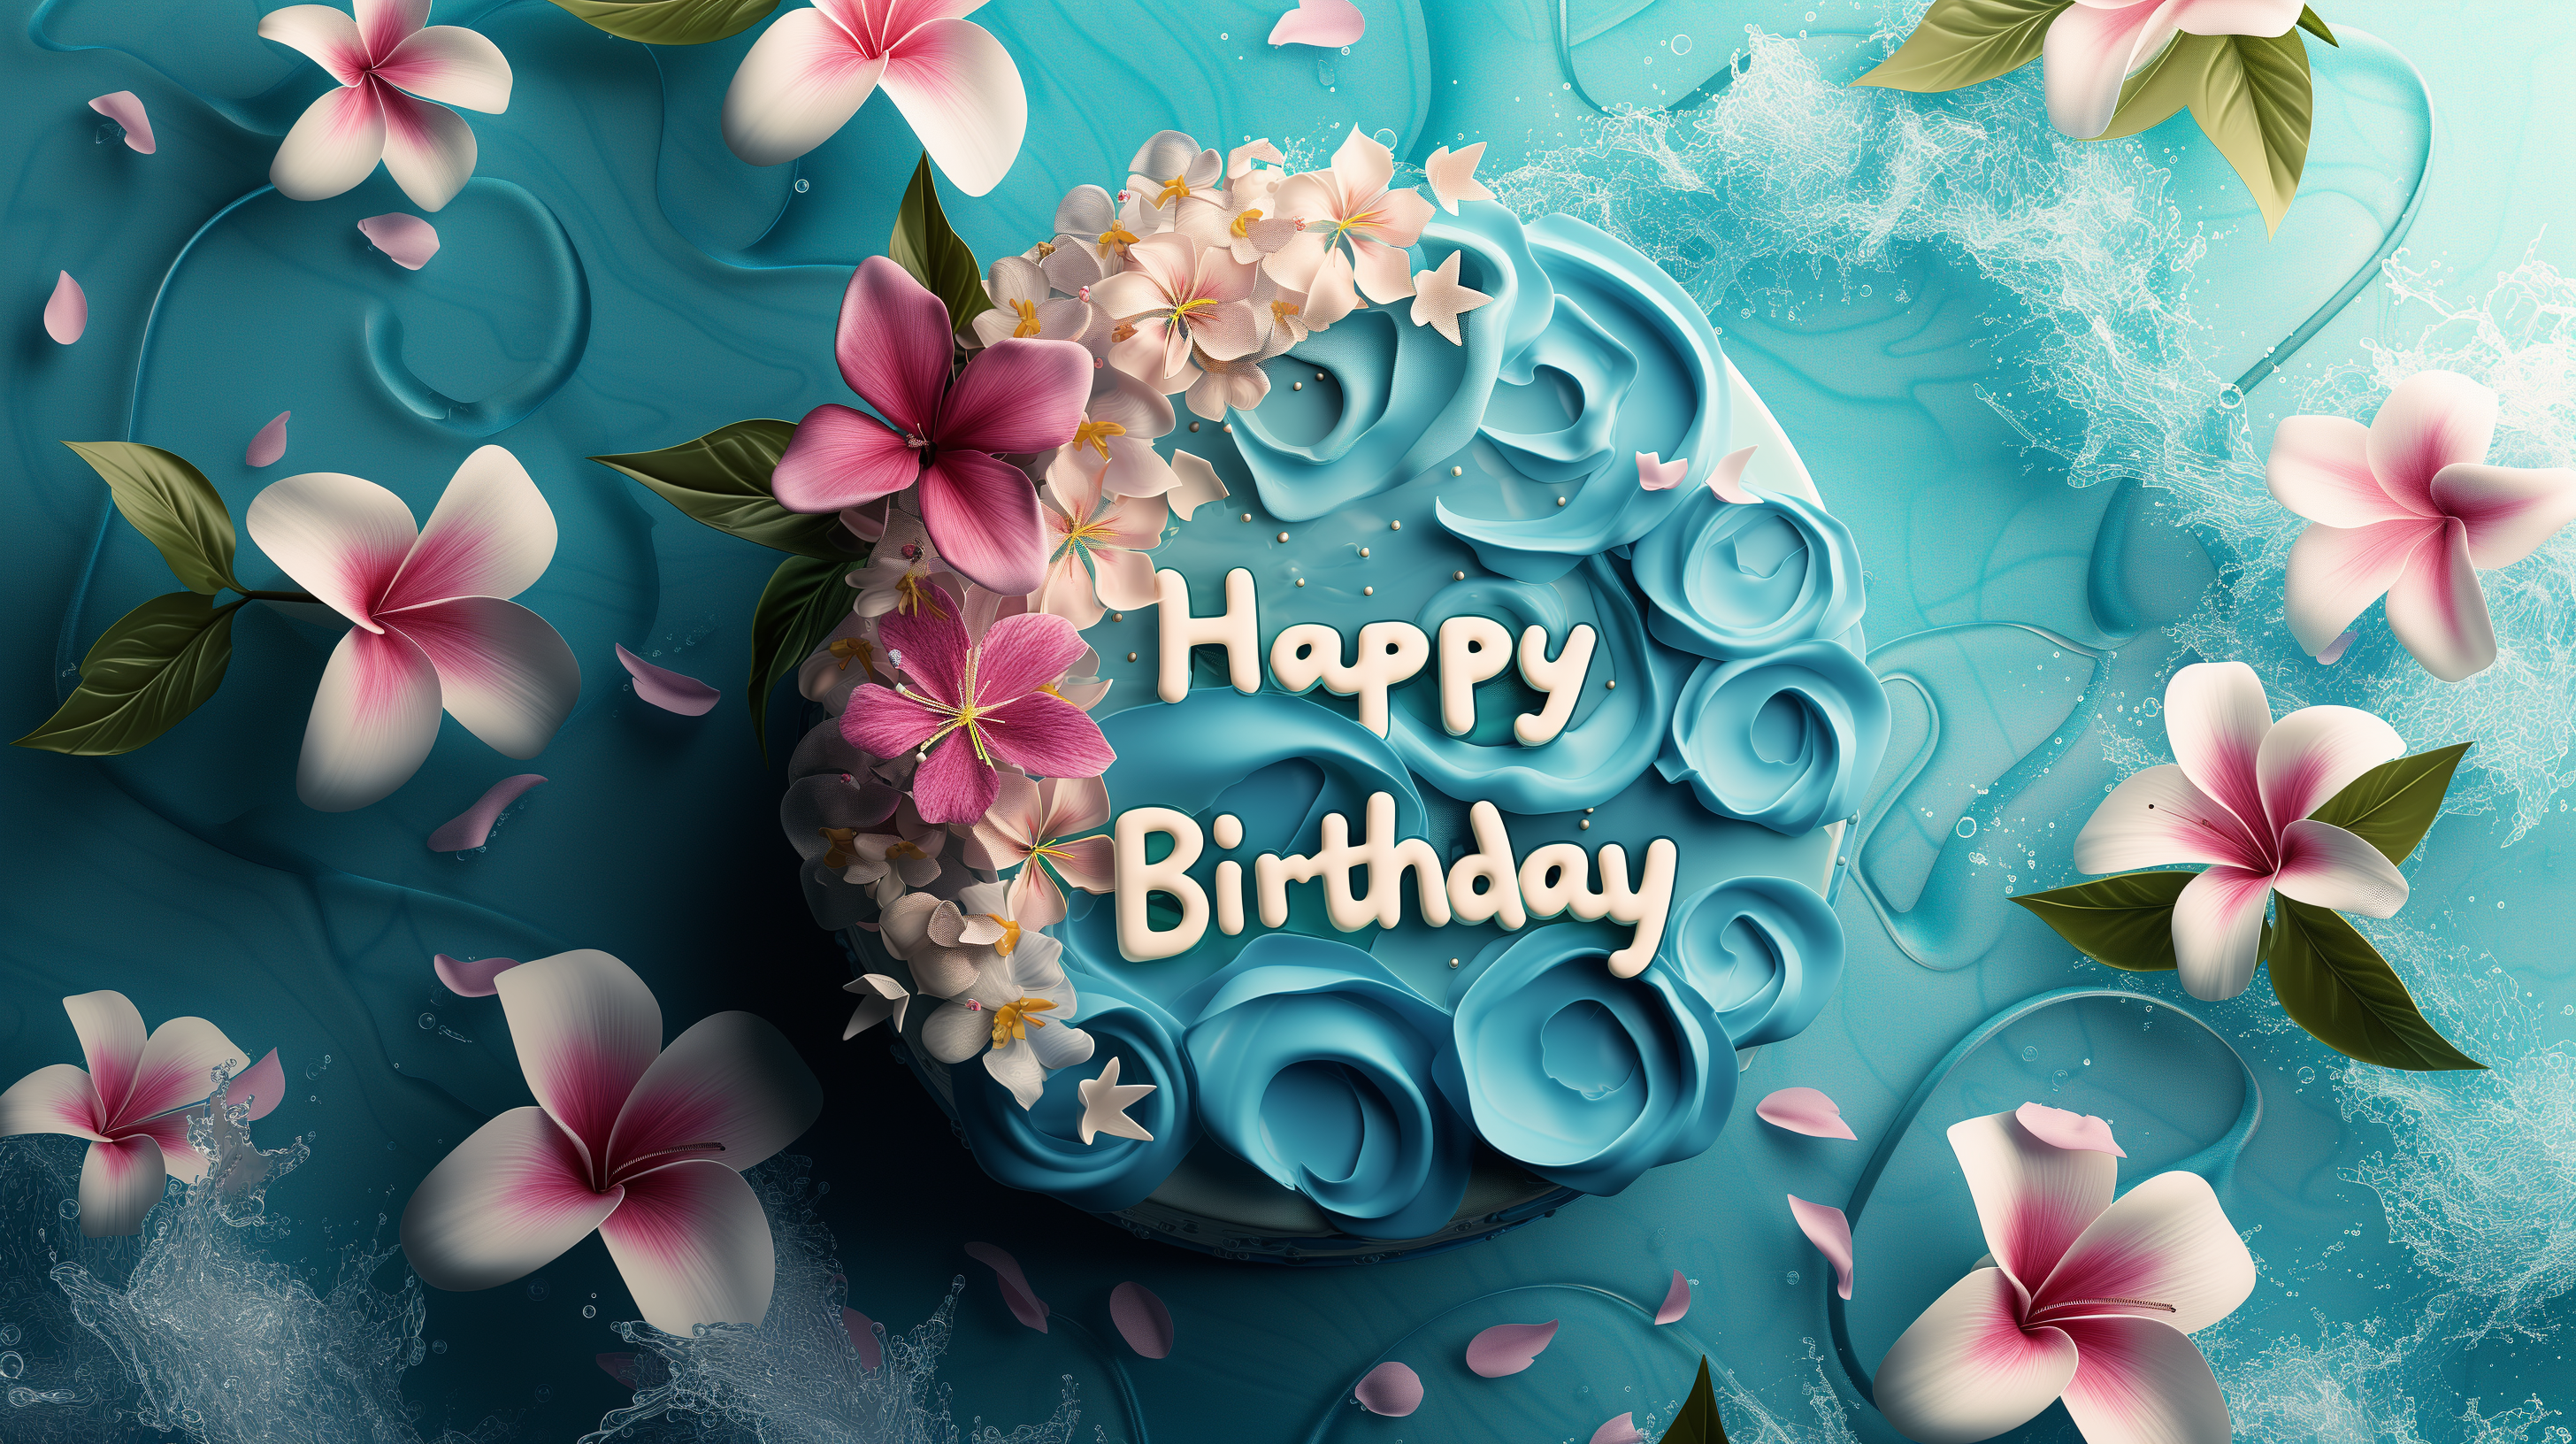 HD wallpaper featuring a decorative Happy Birthday cake with vibrant flowers, perfect for a birthday desktop background.